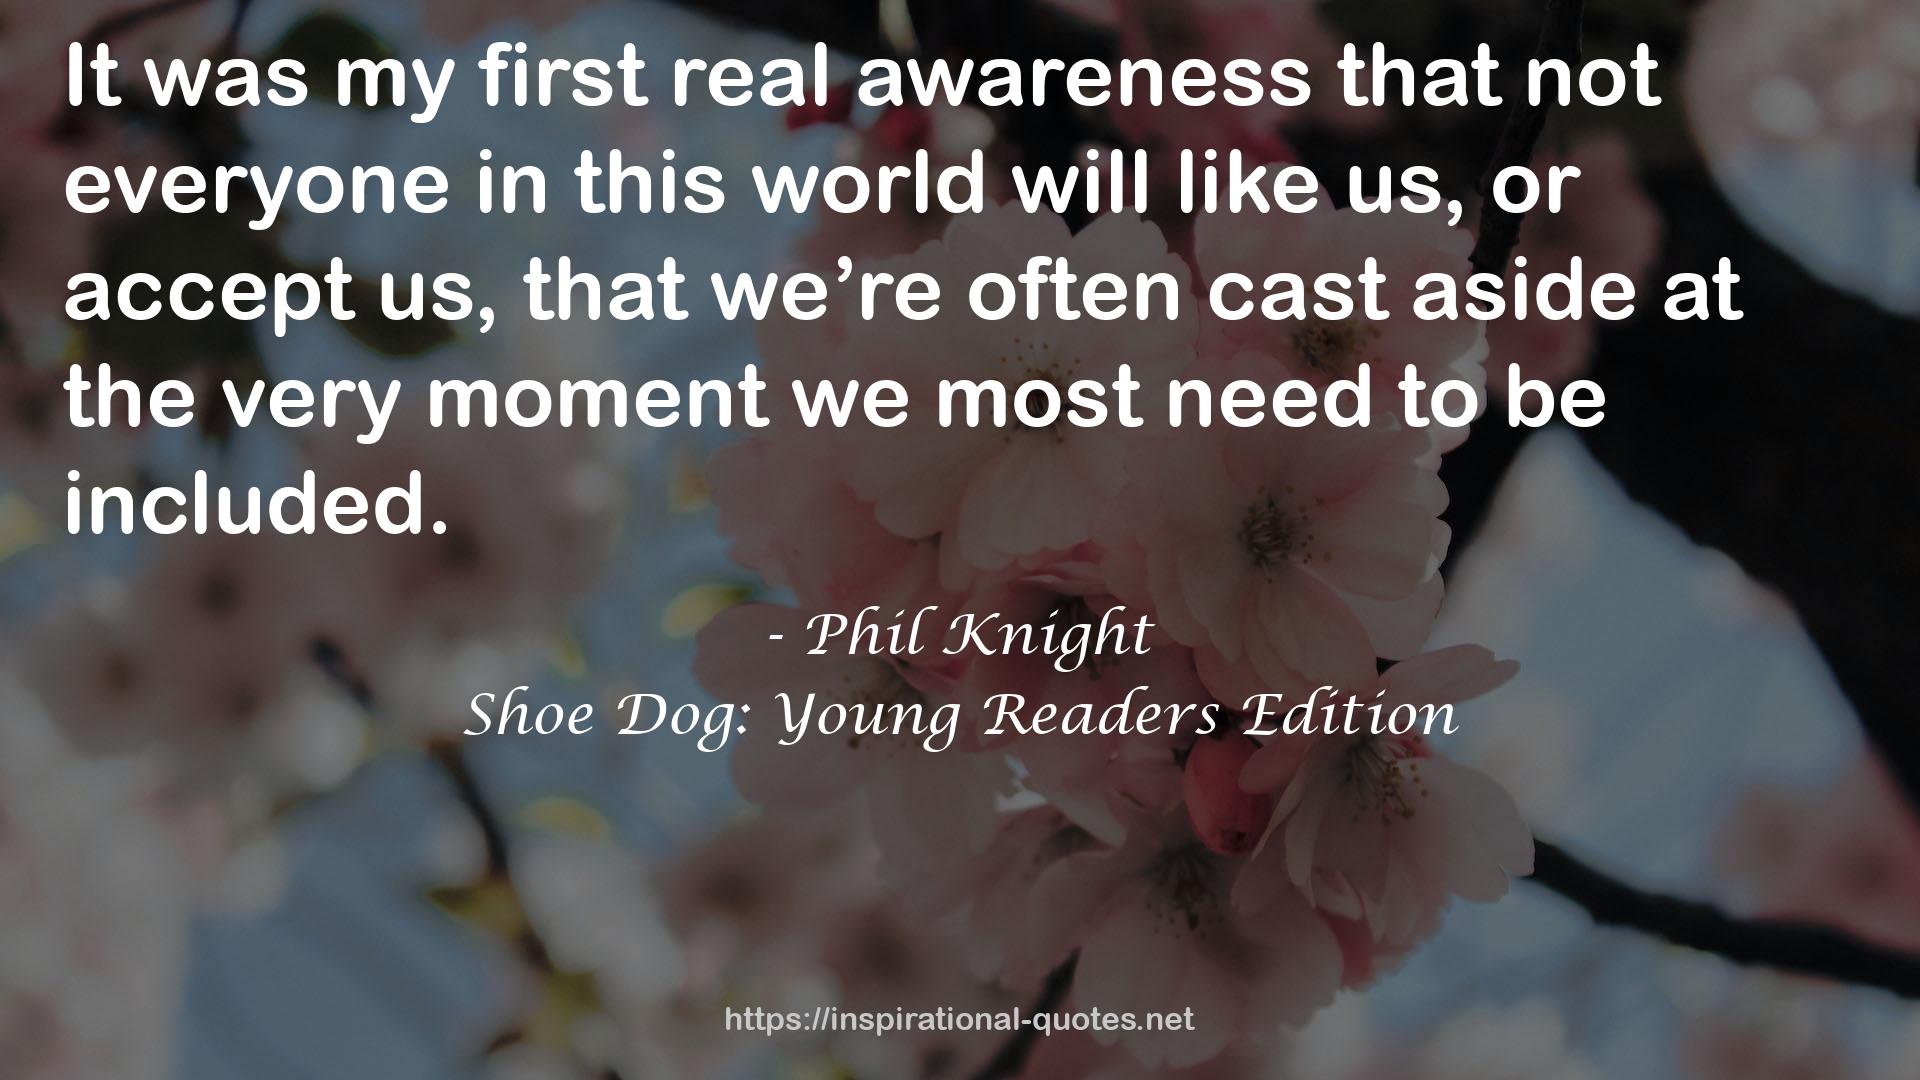 Shoe Dog: Young Readers Edition QUOTES